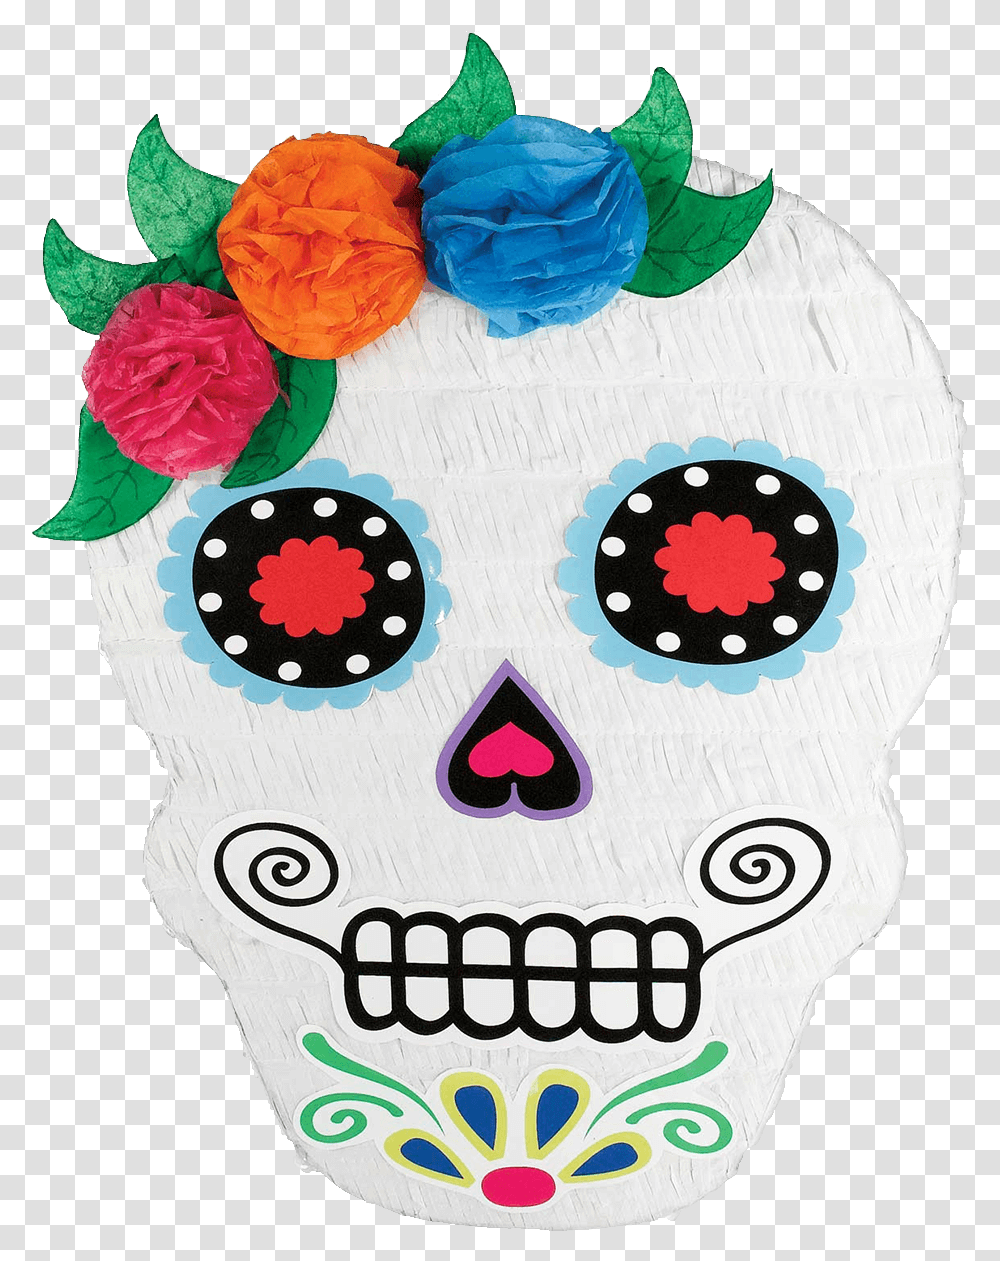 Sugar Skull Day Of The Dead Pinata, Clothing, Apparel, Birthday Cake, Dessert Transparent Png